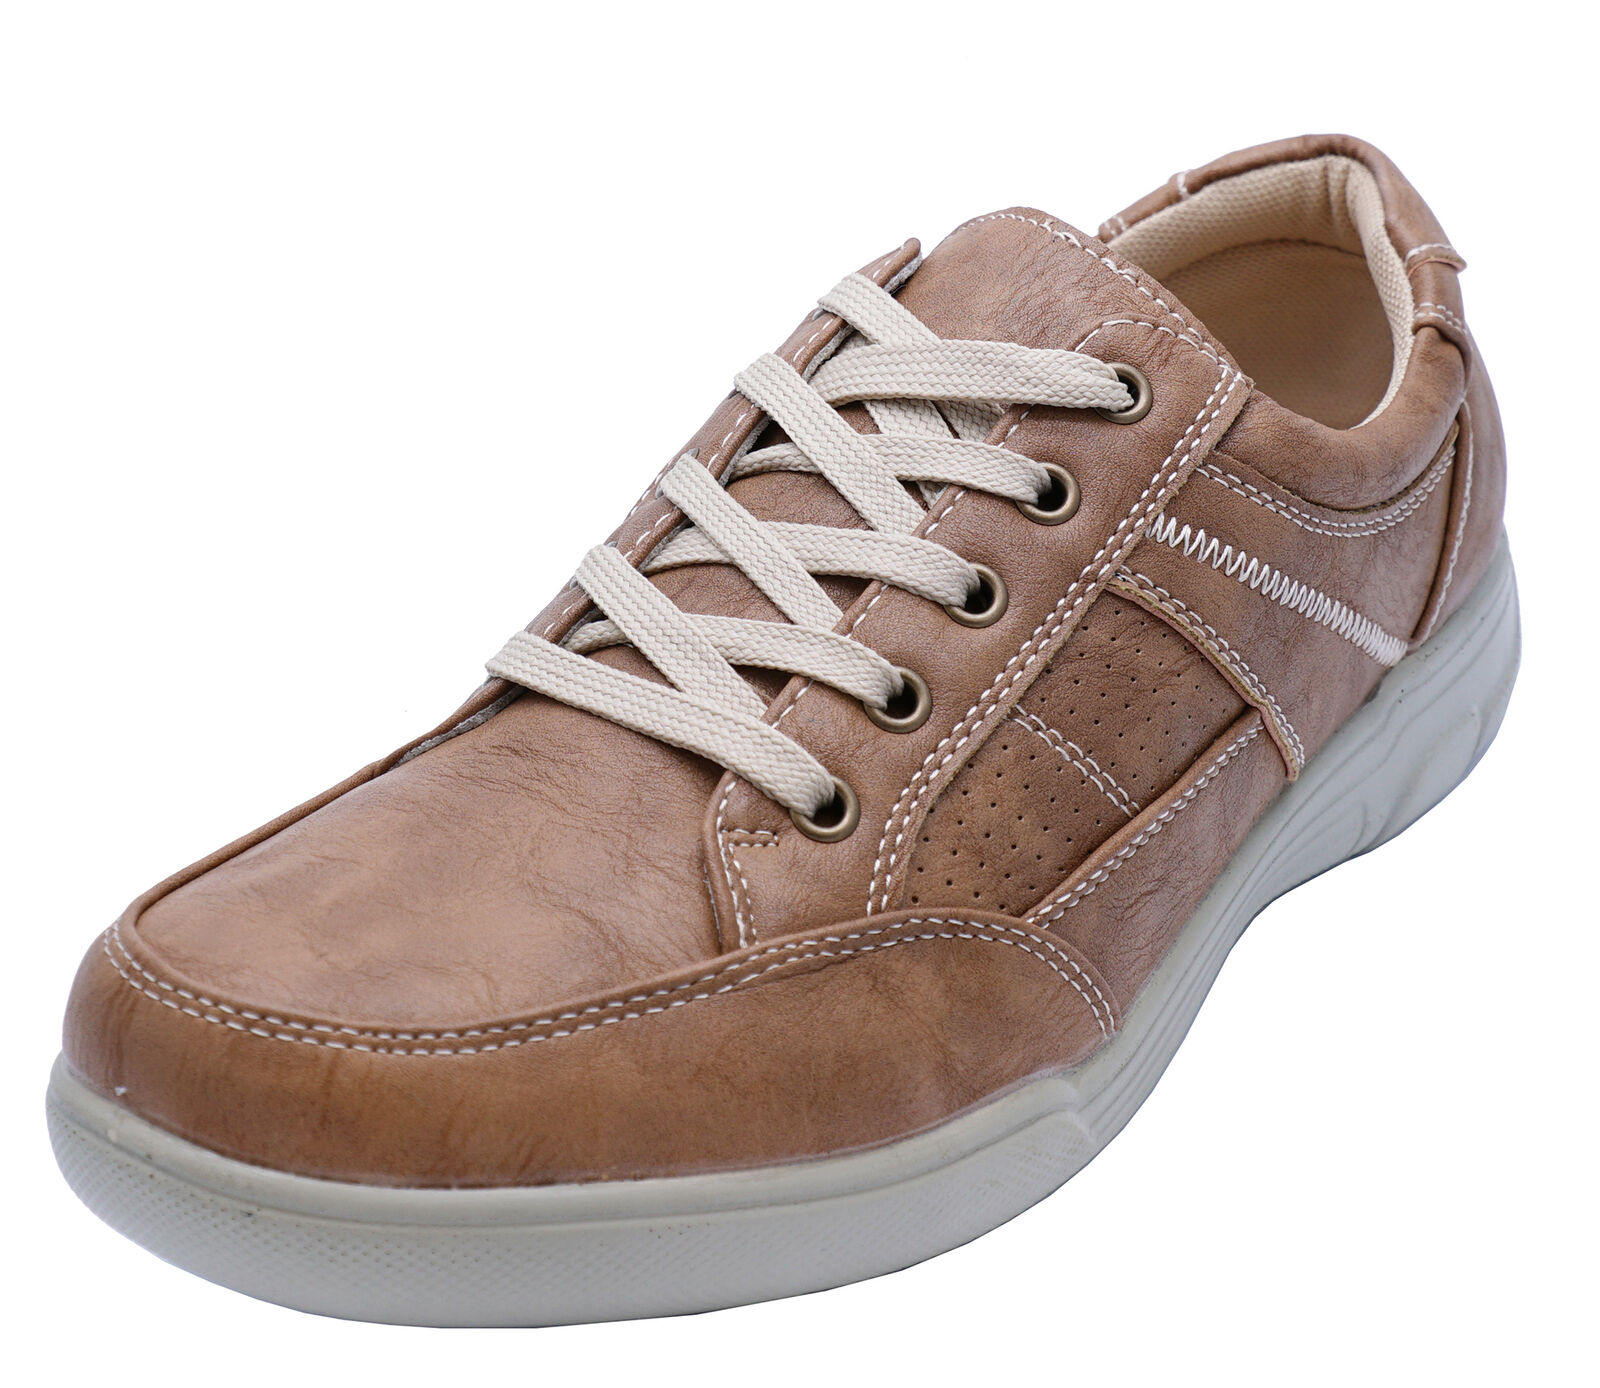 MENS TAN LACE-UP COMFY LIGHTWEIGHT 